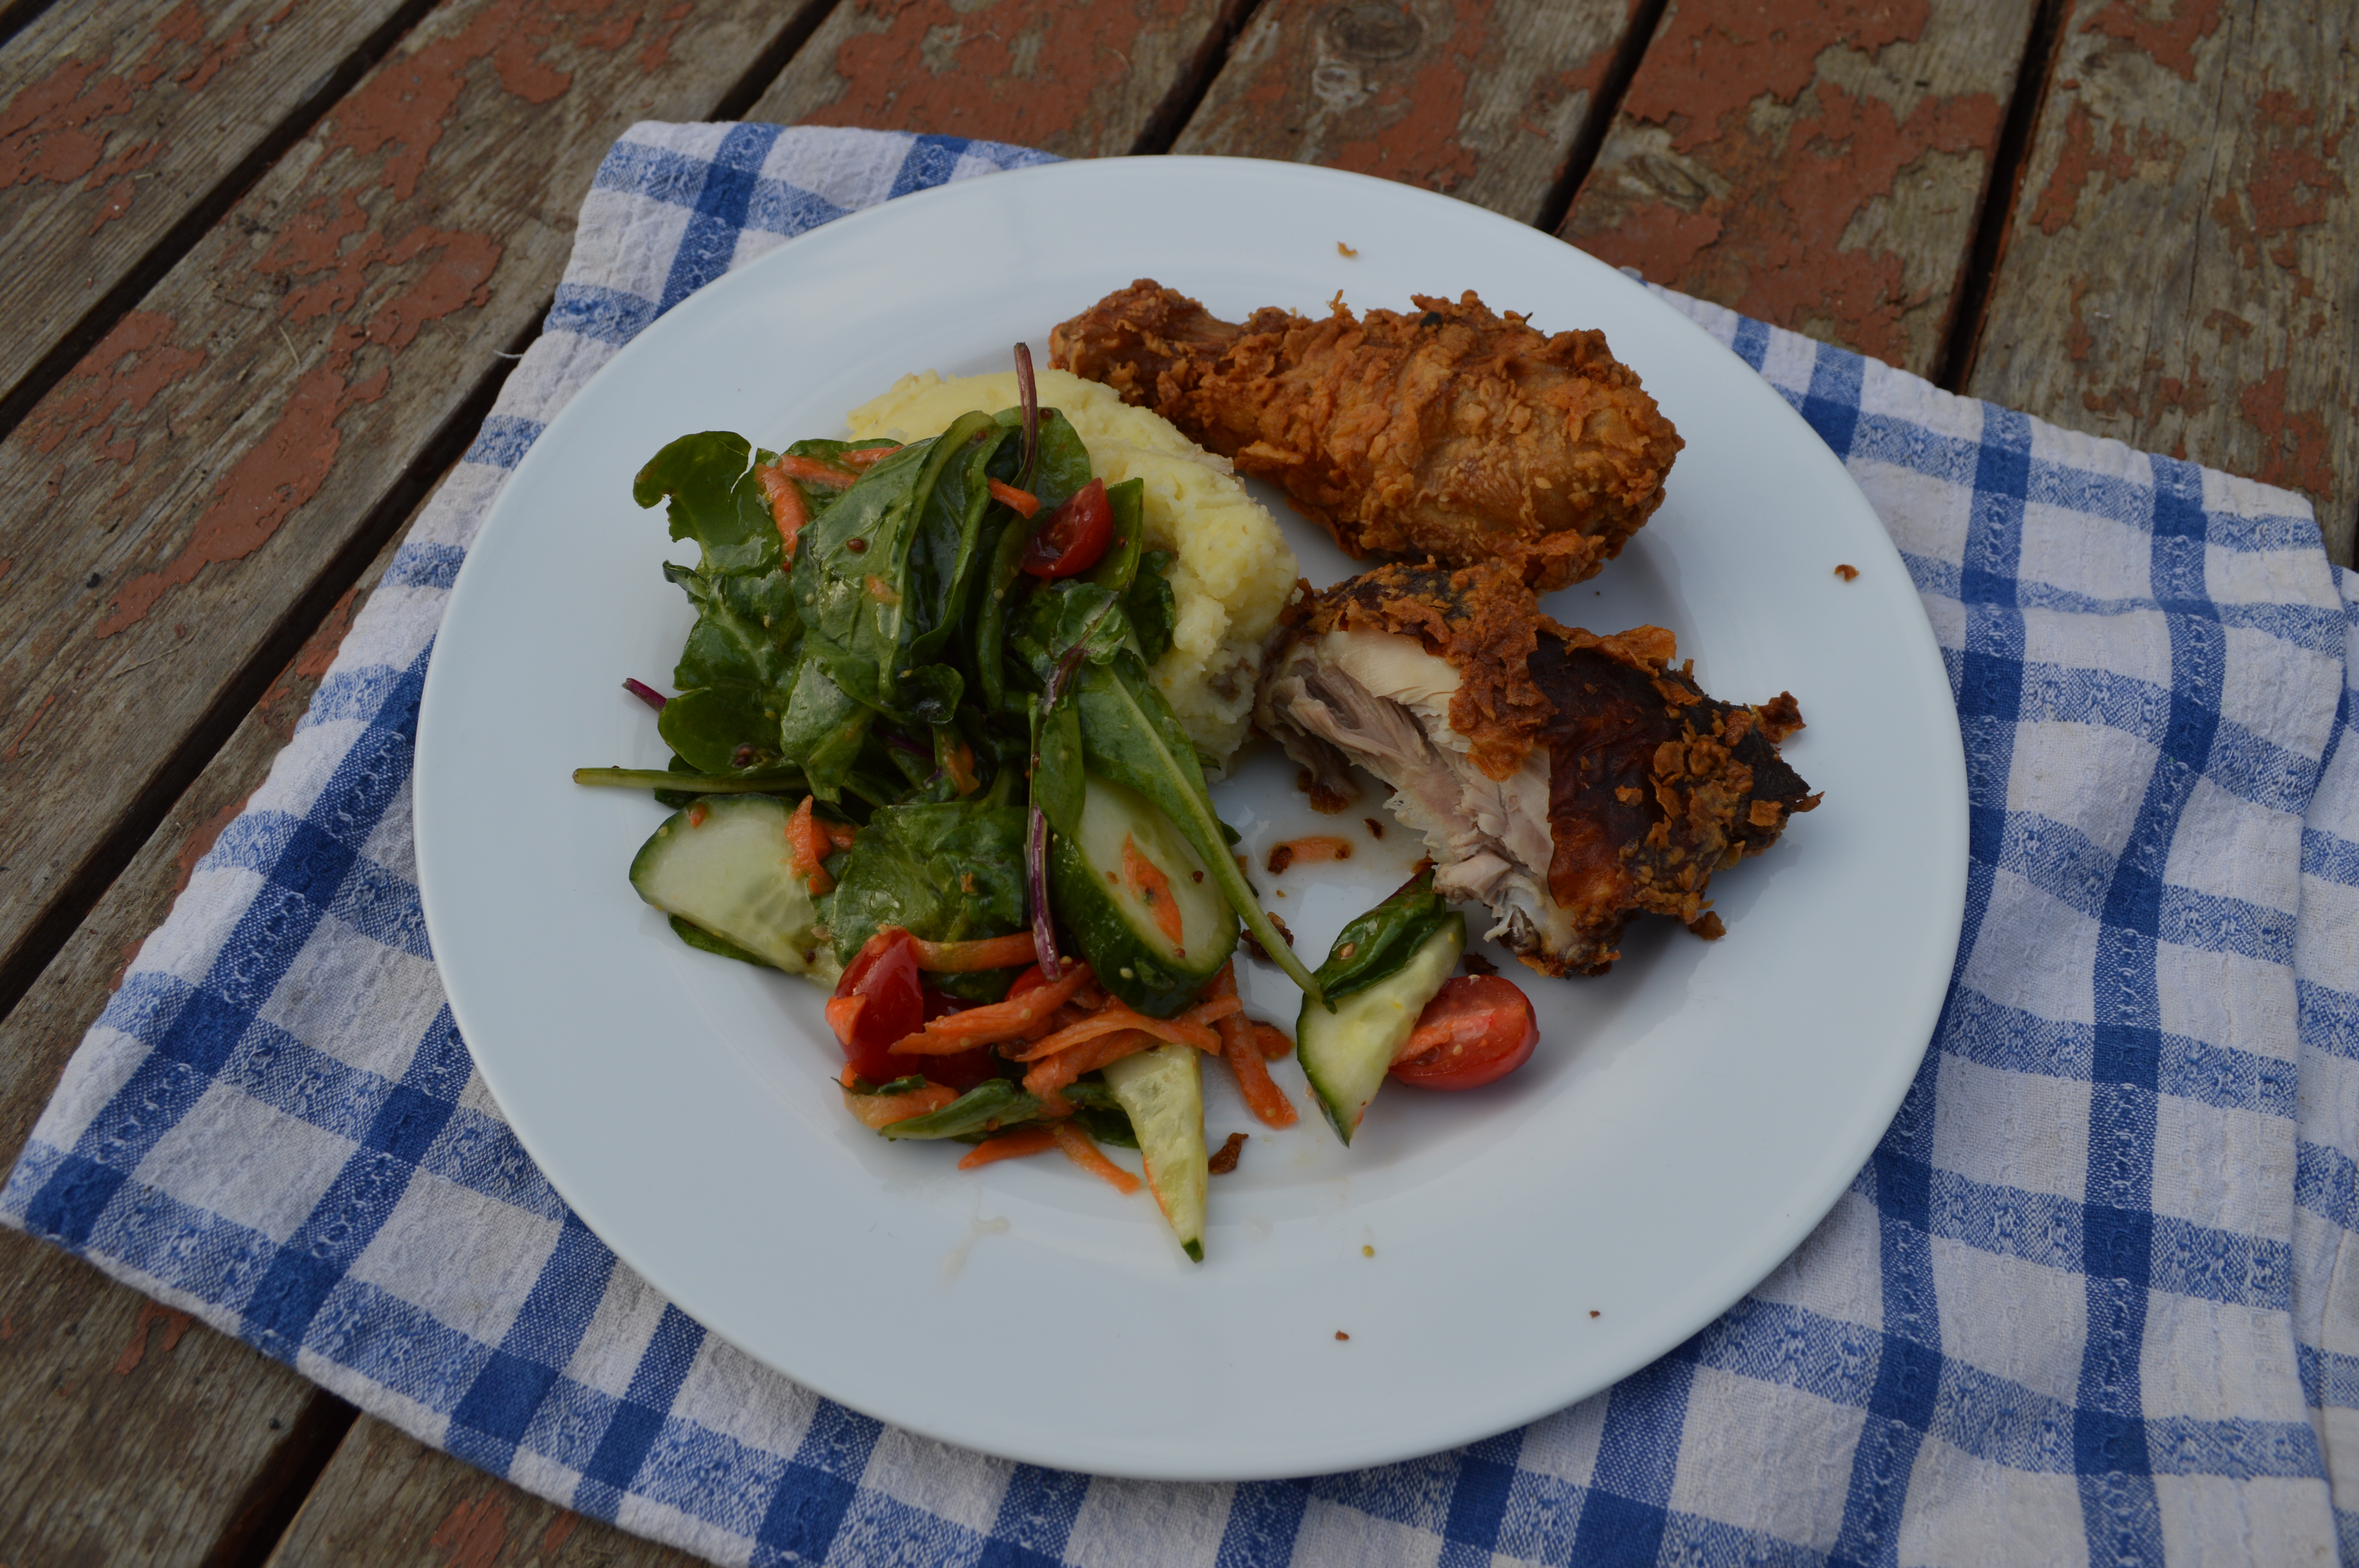 A plate of fried chicken, buttermilk mash potatoes, and green salad